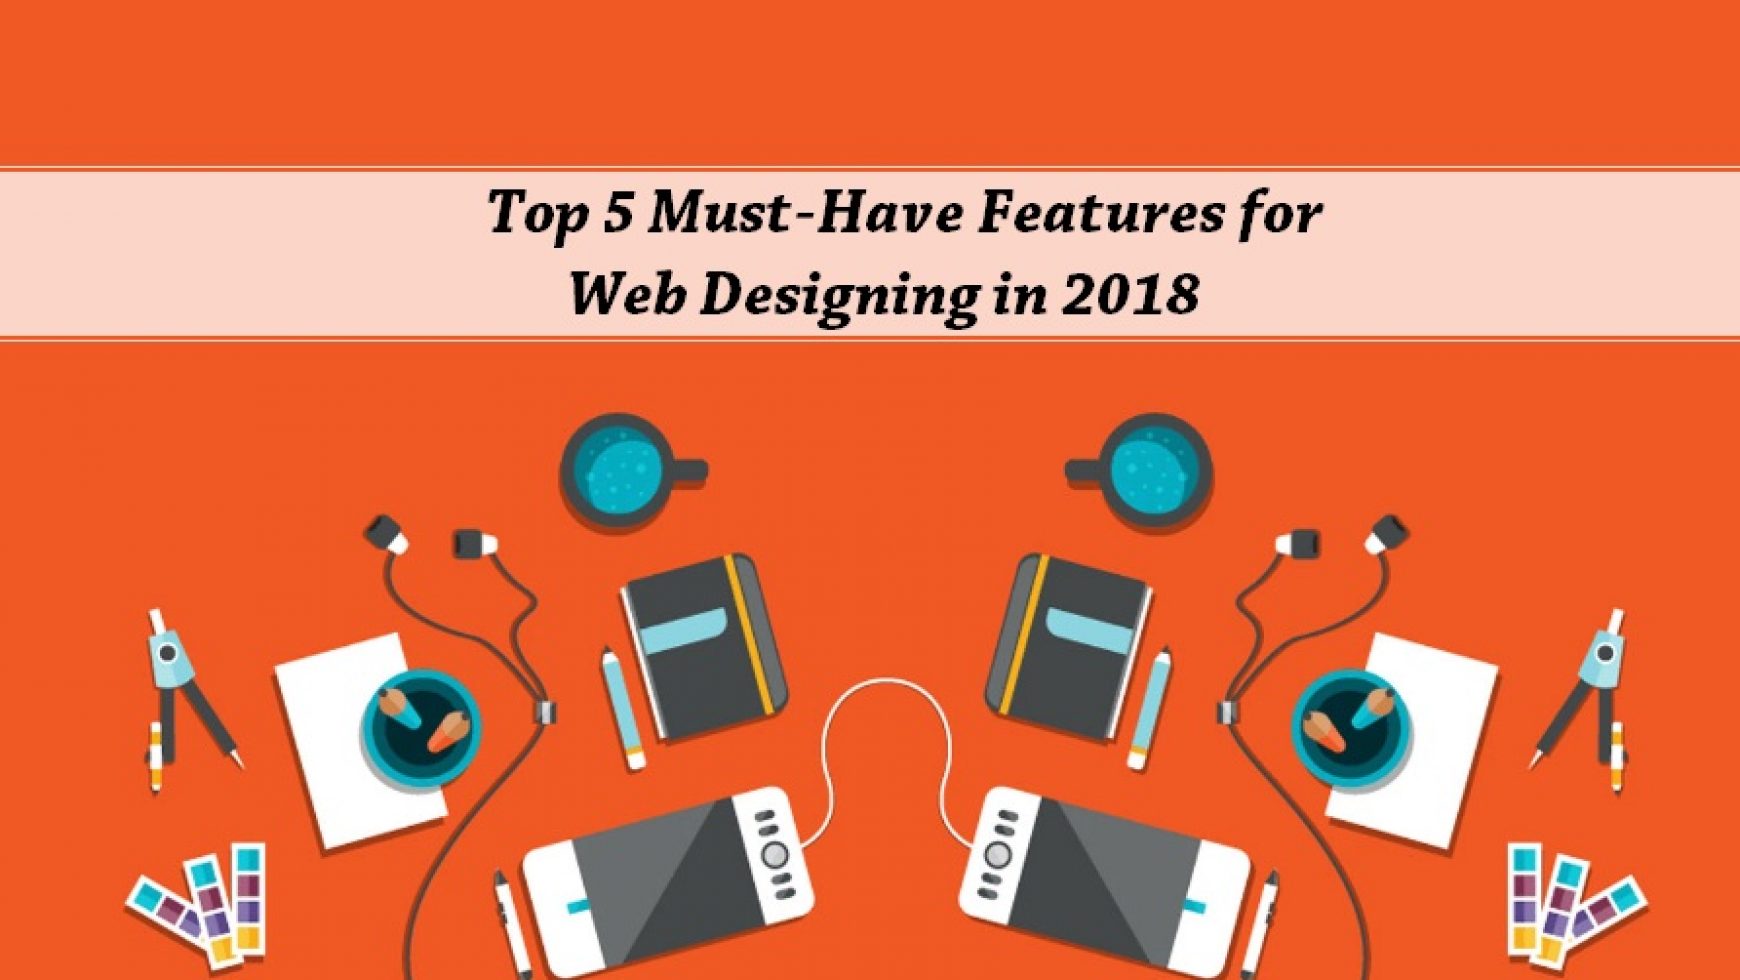 Top 5 Must-Have Features for Web Designing in 2018